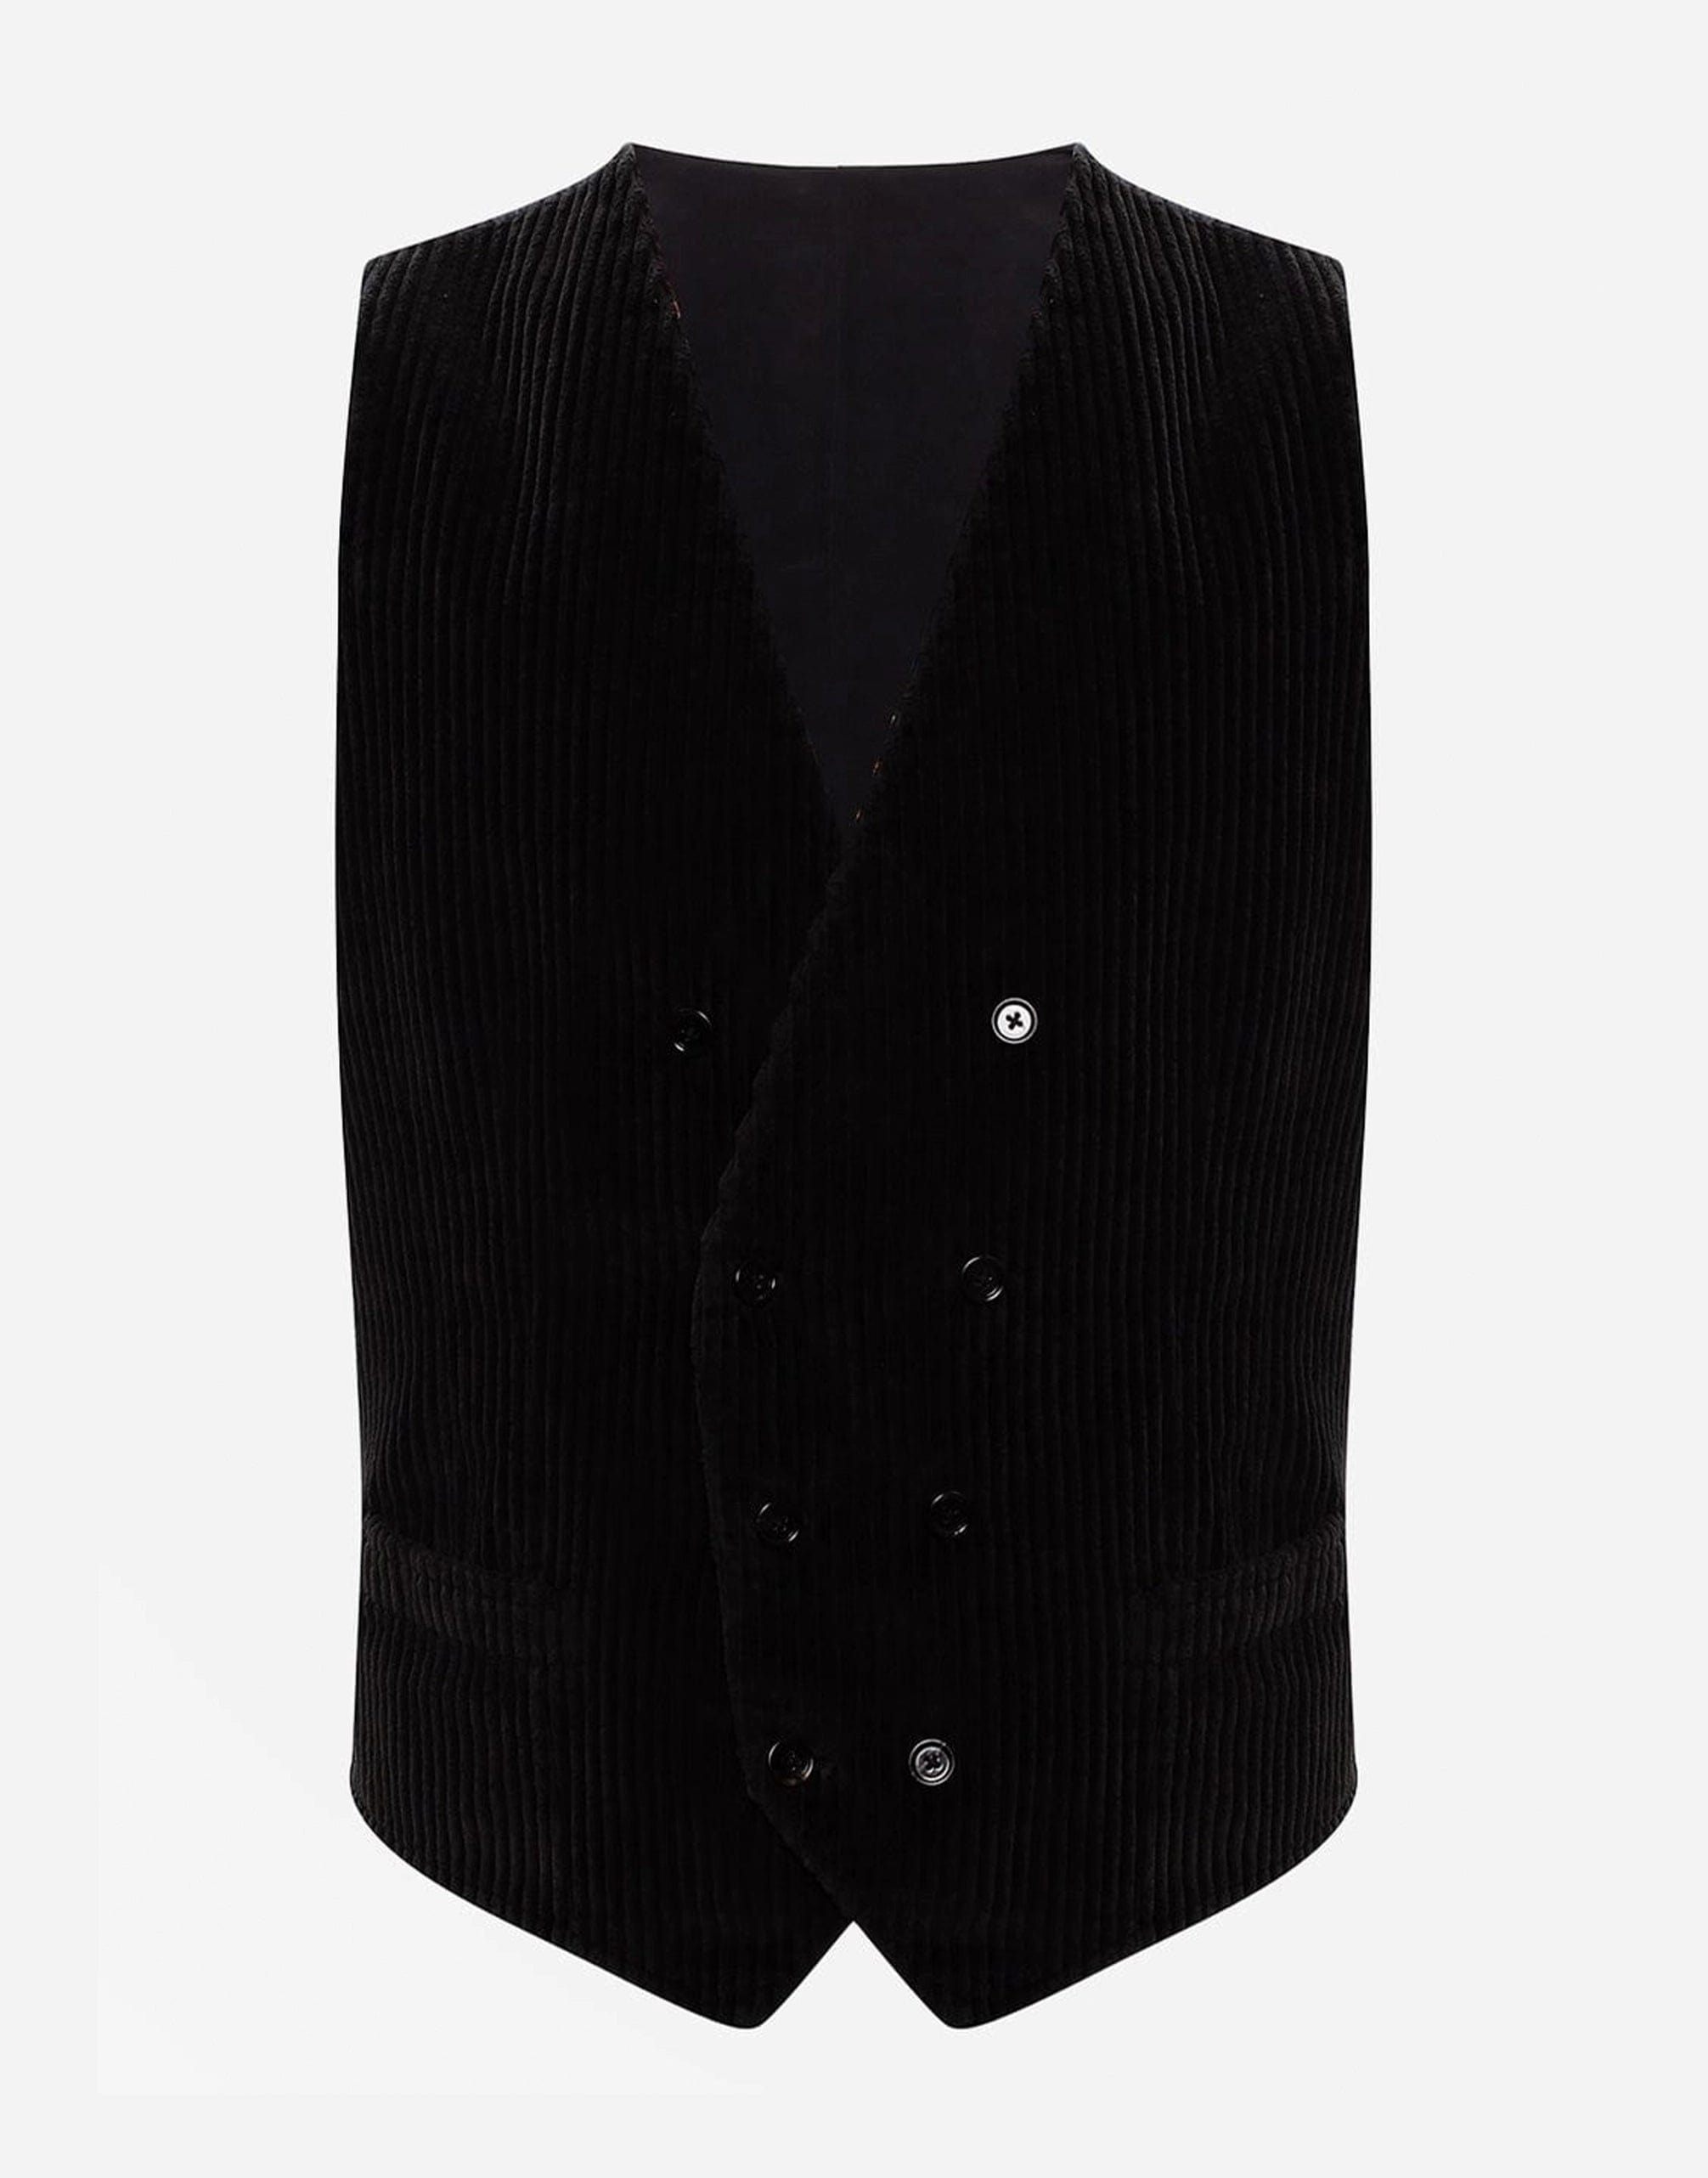 Dolce & Gabbana Silk Double-Breasted Vest